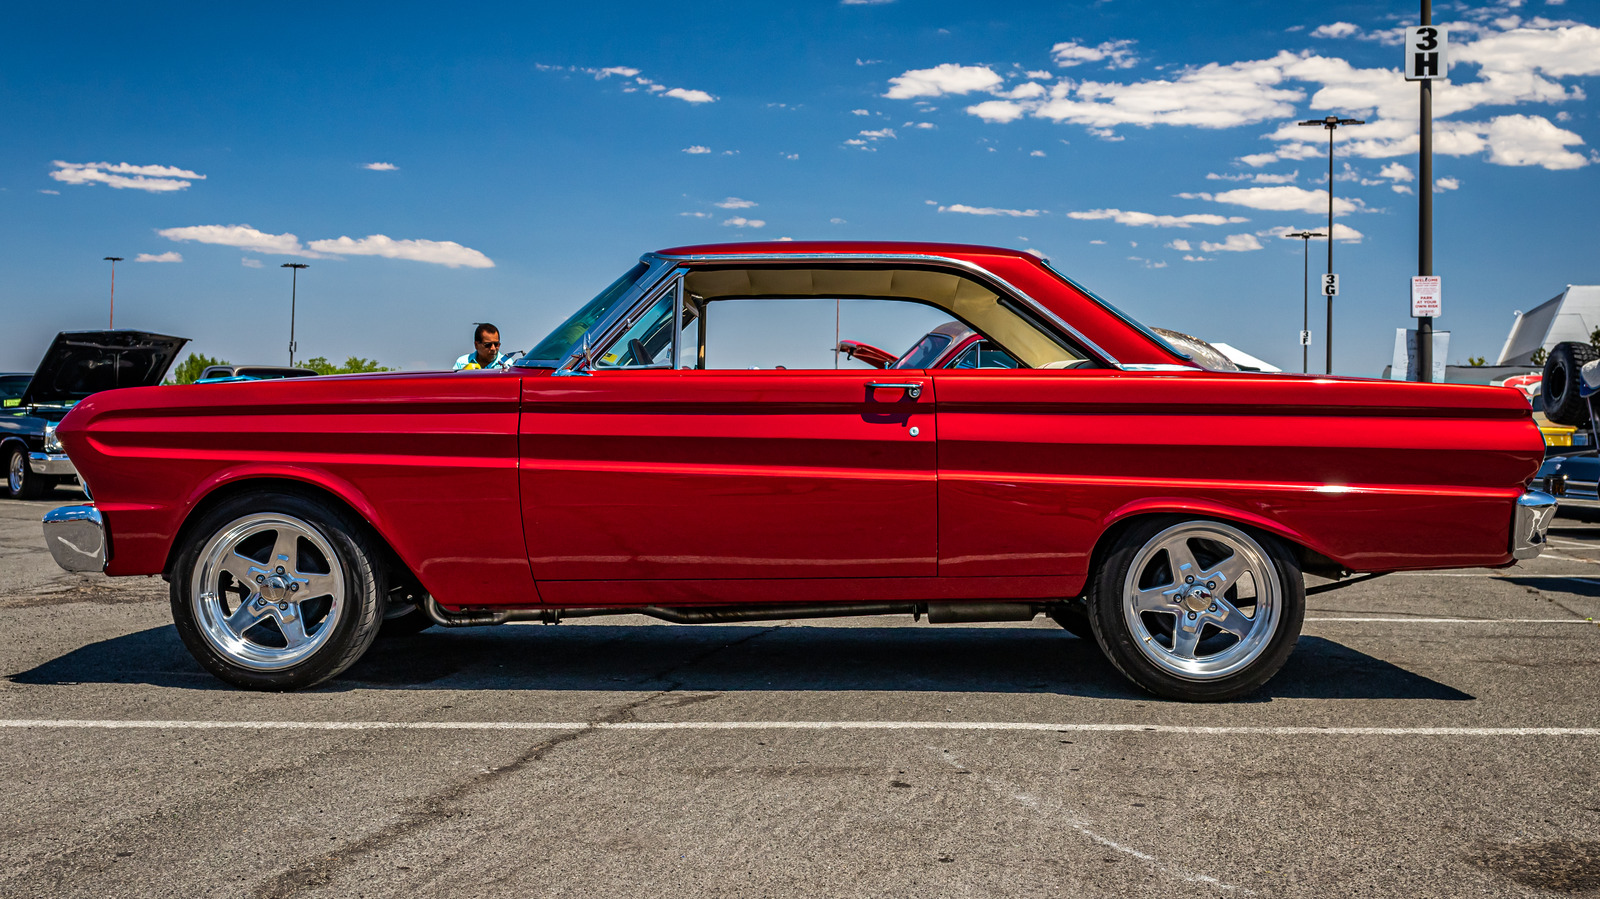 How The Ford Falcon Played A Major Role In The Rise Of The Mustang – SlashGear